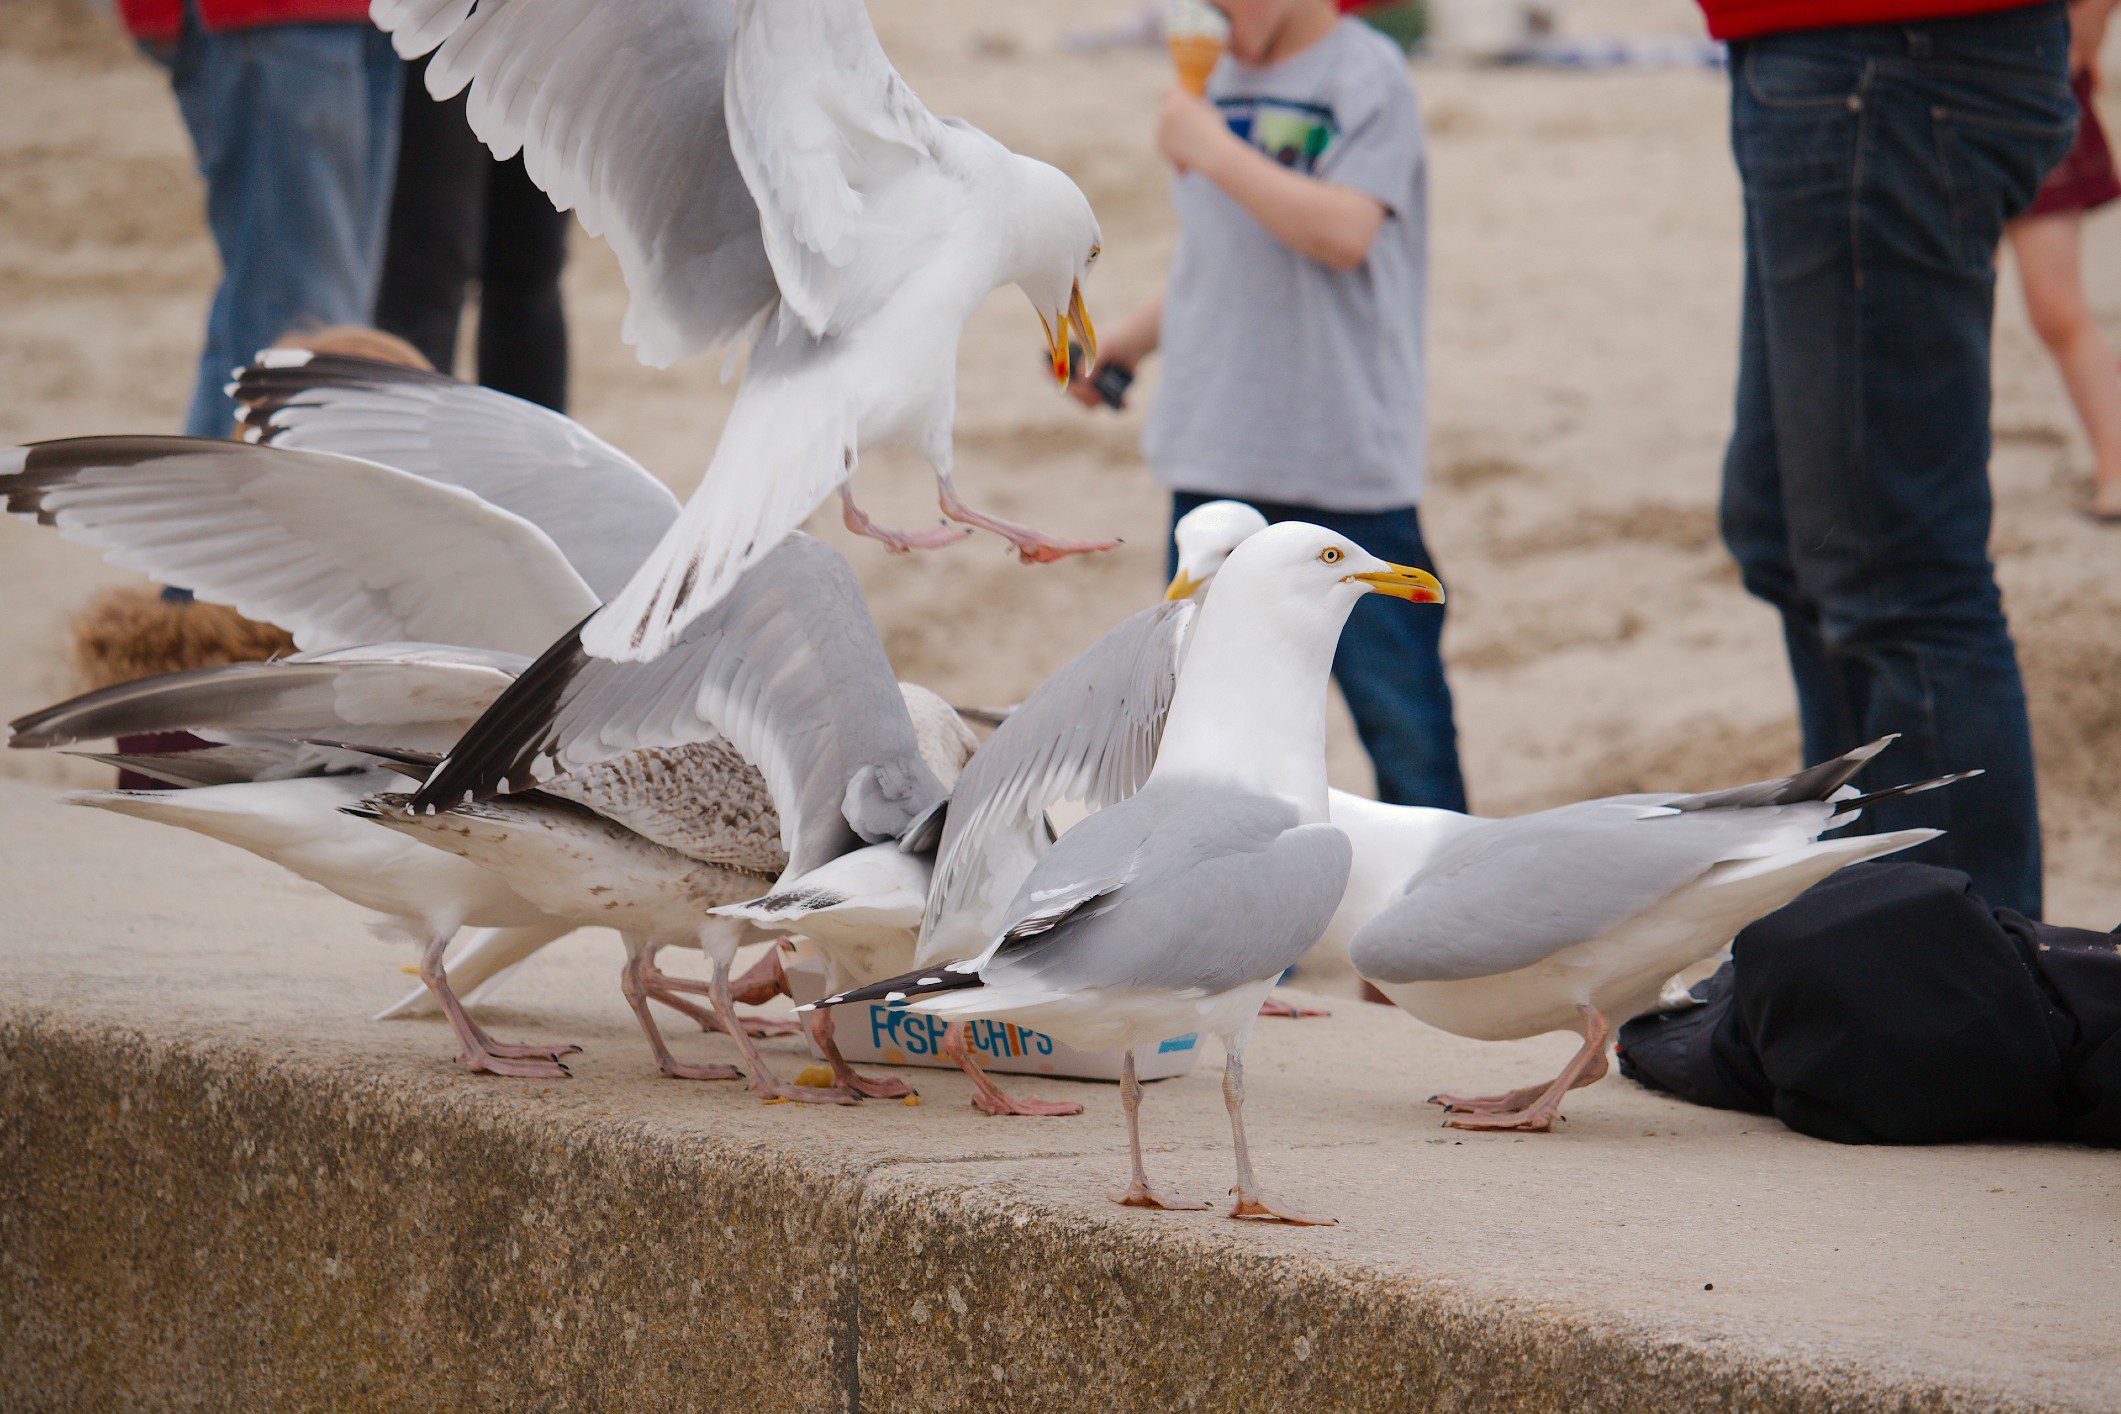 Elderly woman survives stroke after seagull steals her chips